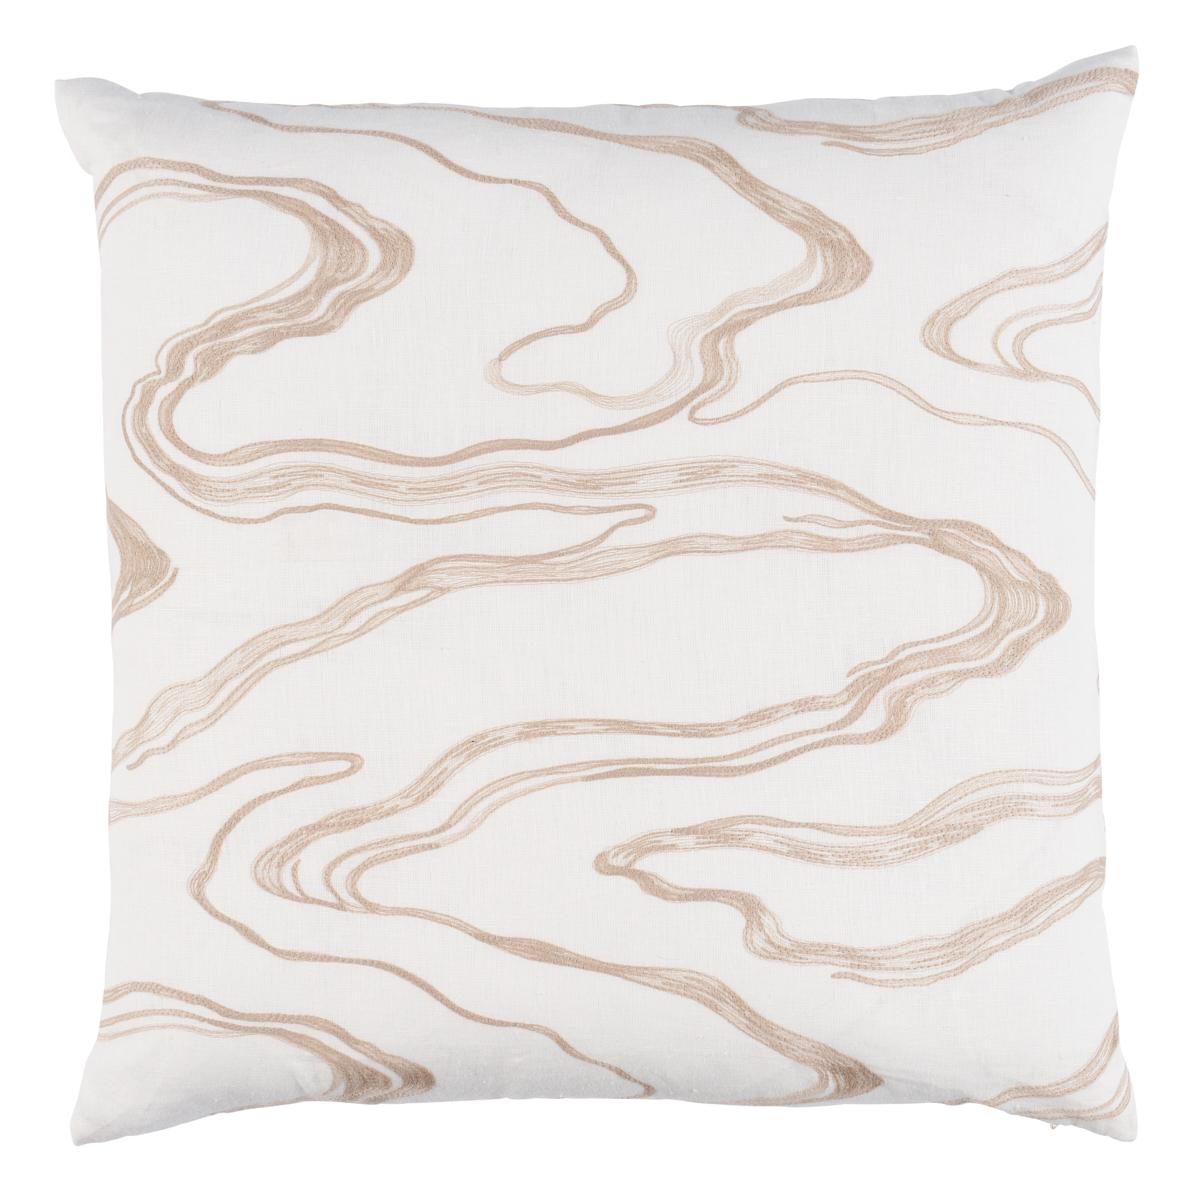 Desert Wind Embroidery Pillow in Sandstone 22 x 22" For Sale